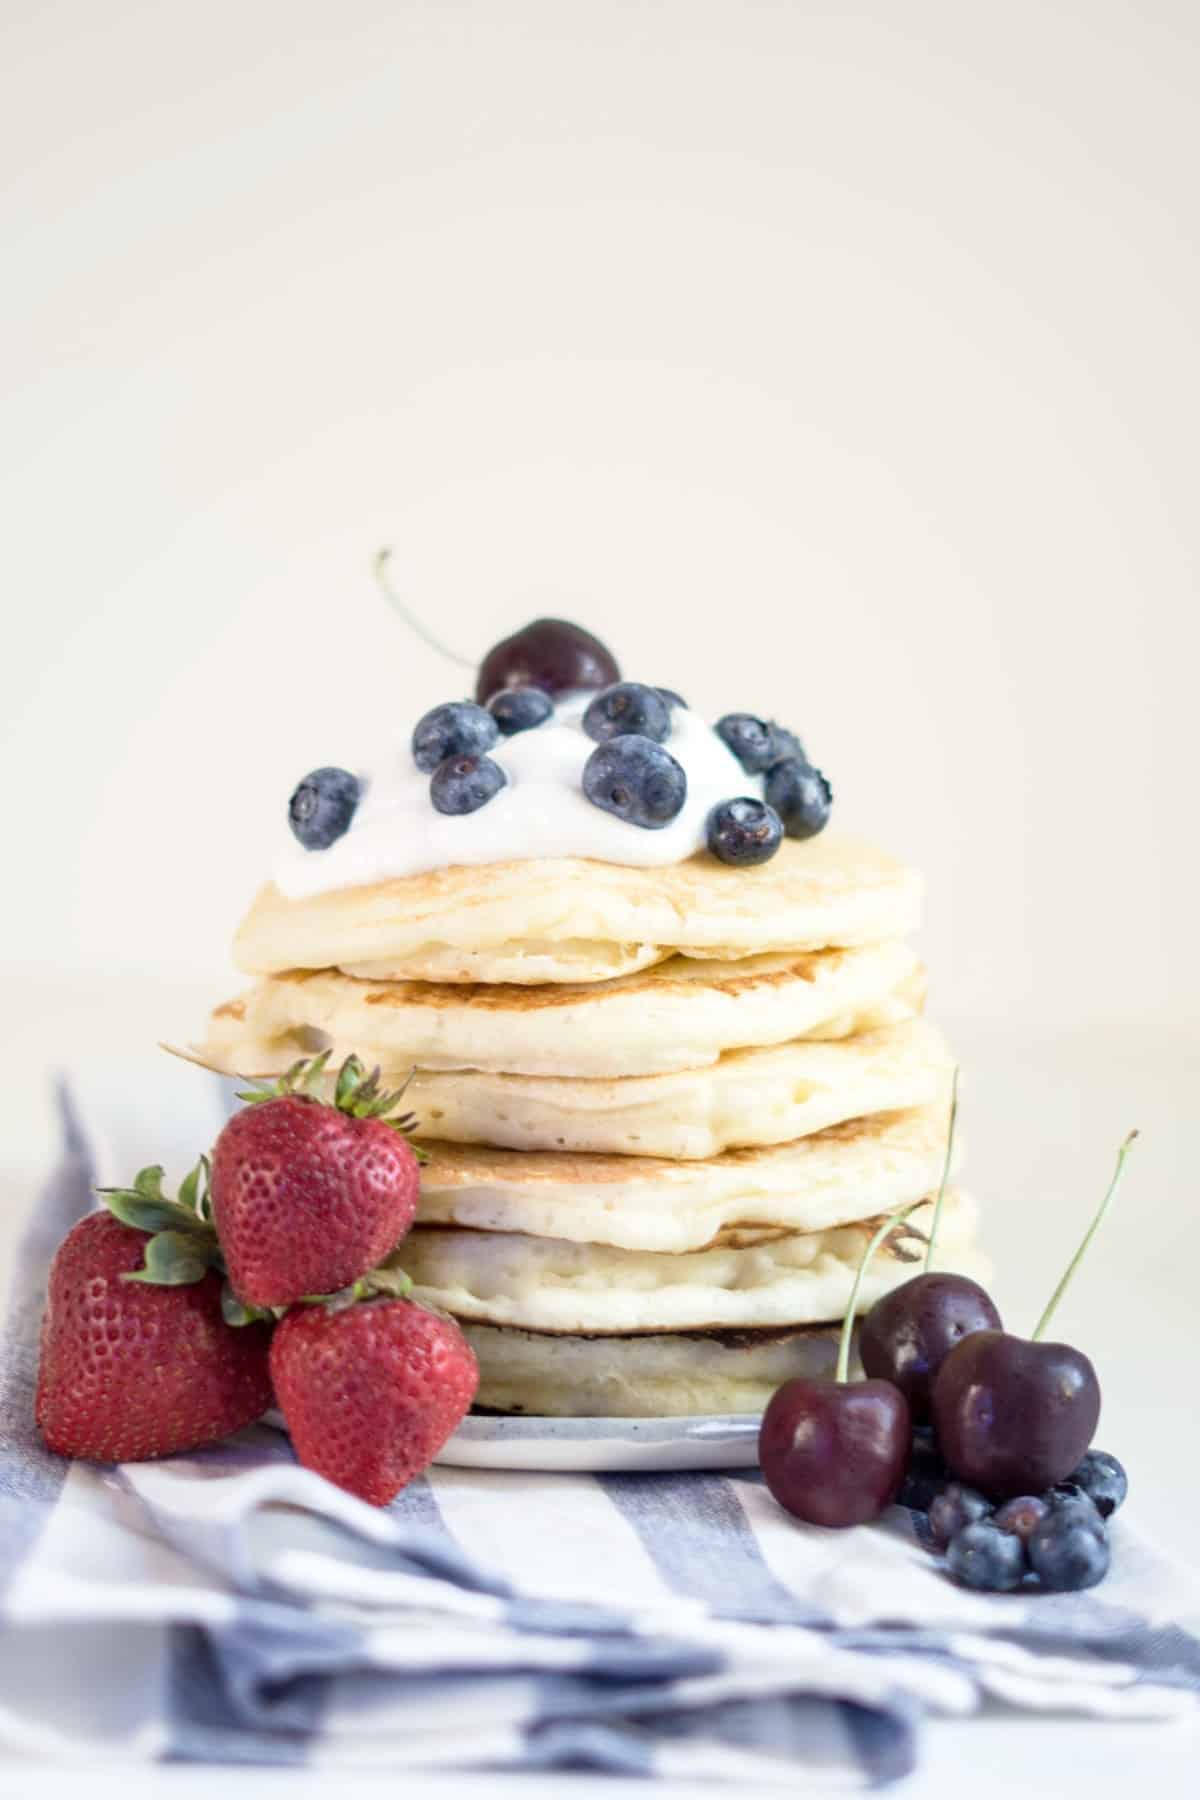 Sourdough Pancakes {For the Absolutely Fluffiest Pancakes Ever!}